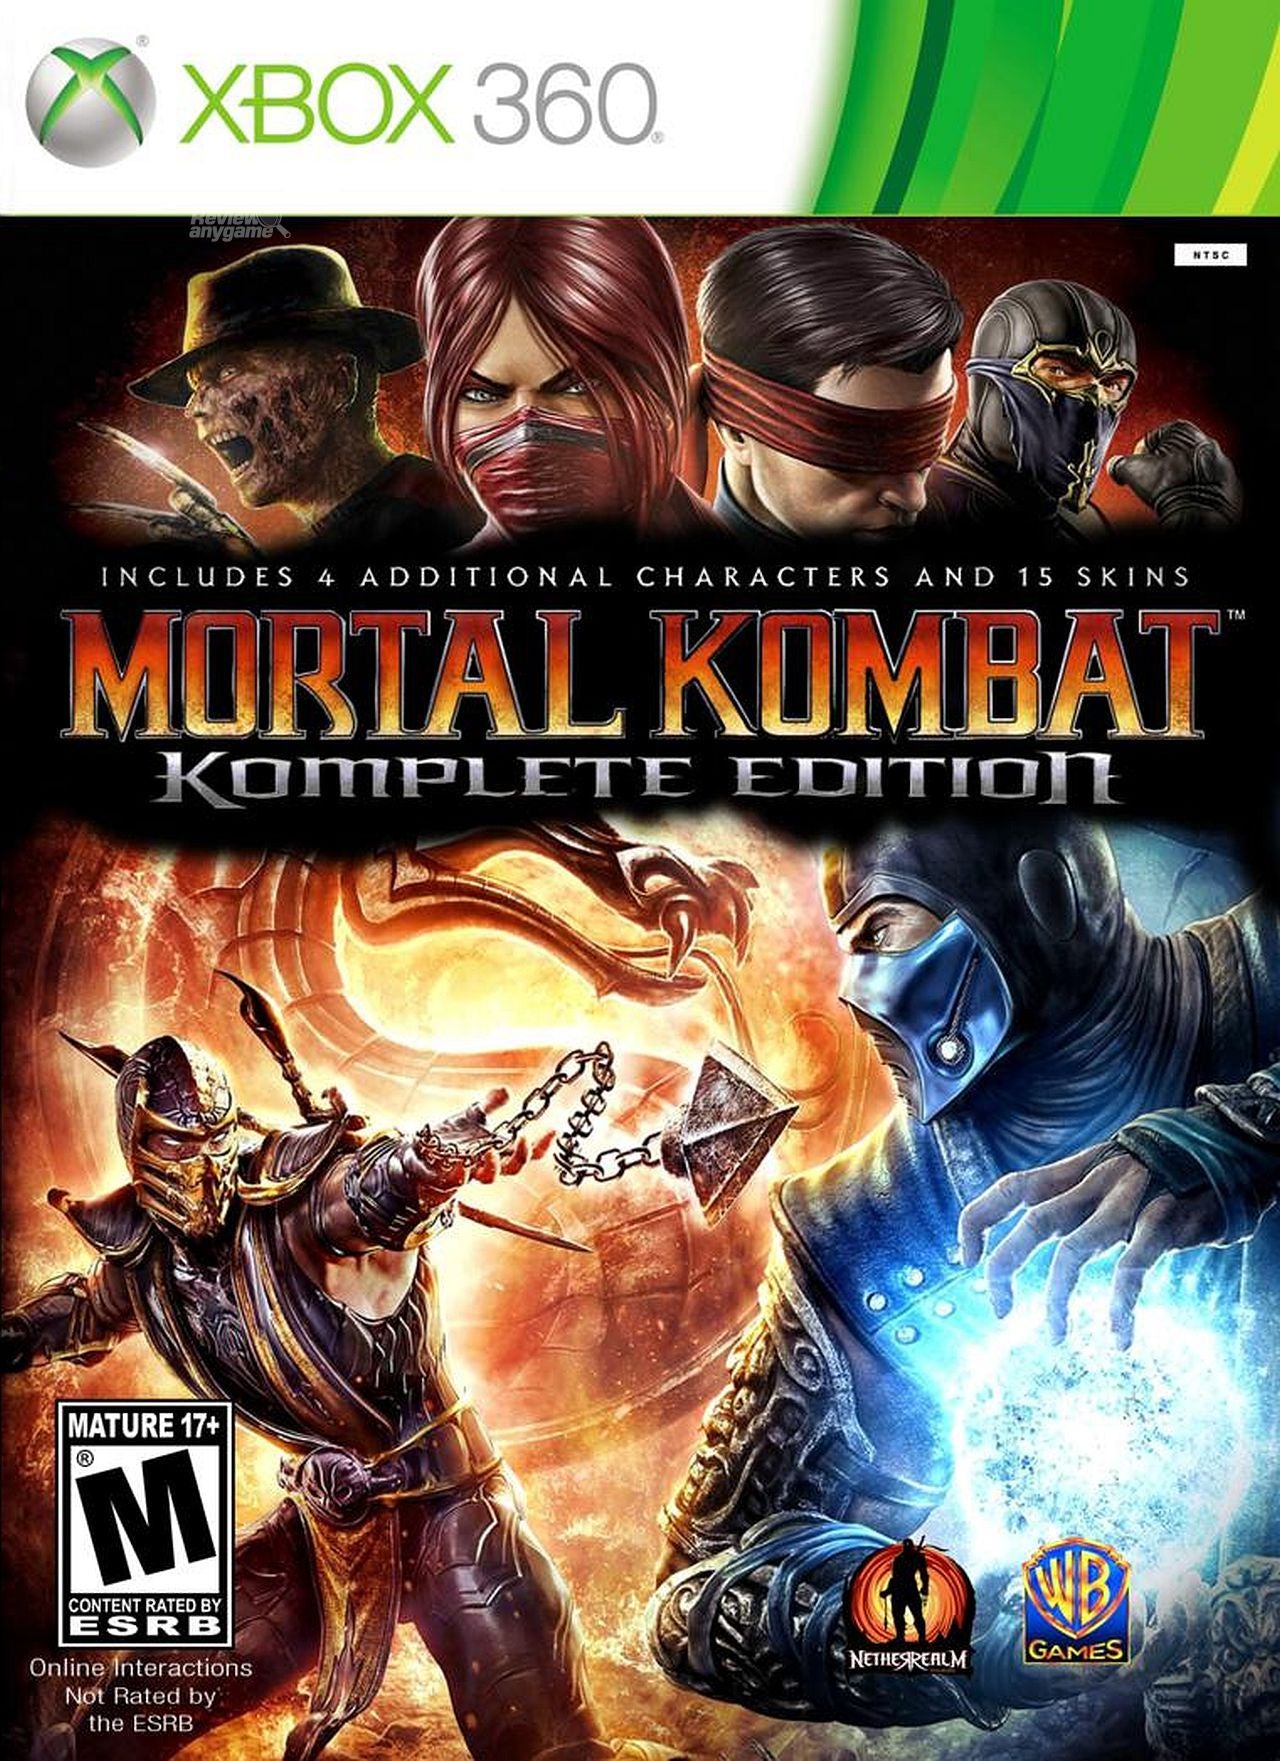 Mortal Kombat, Cover Art Only (NO GAME/MANUAL/CASE!), XBOX 360